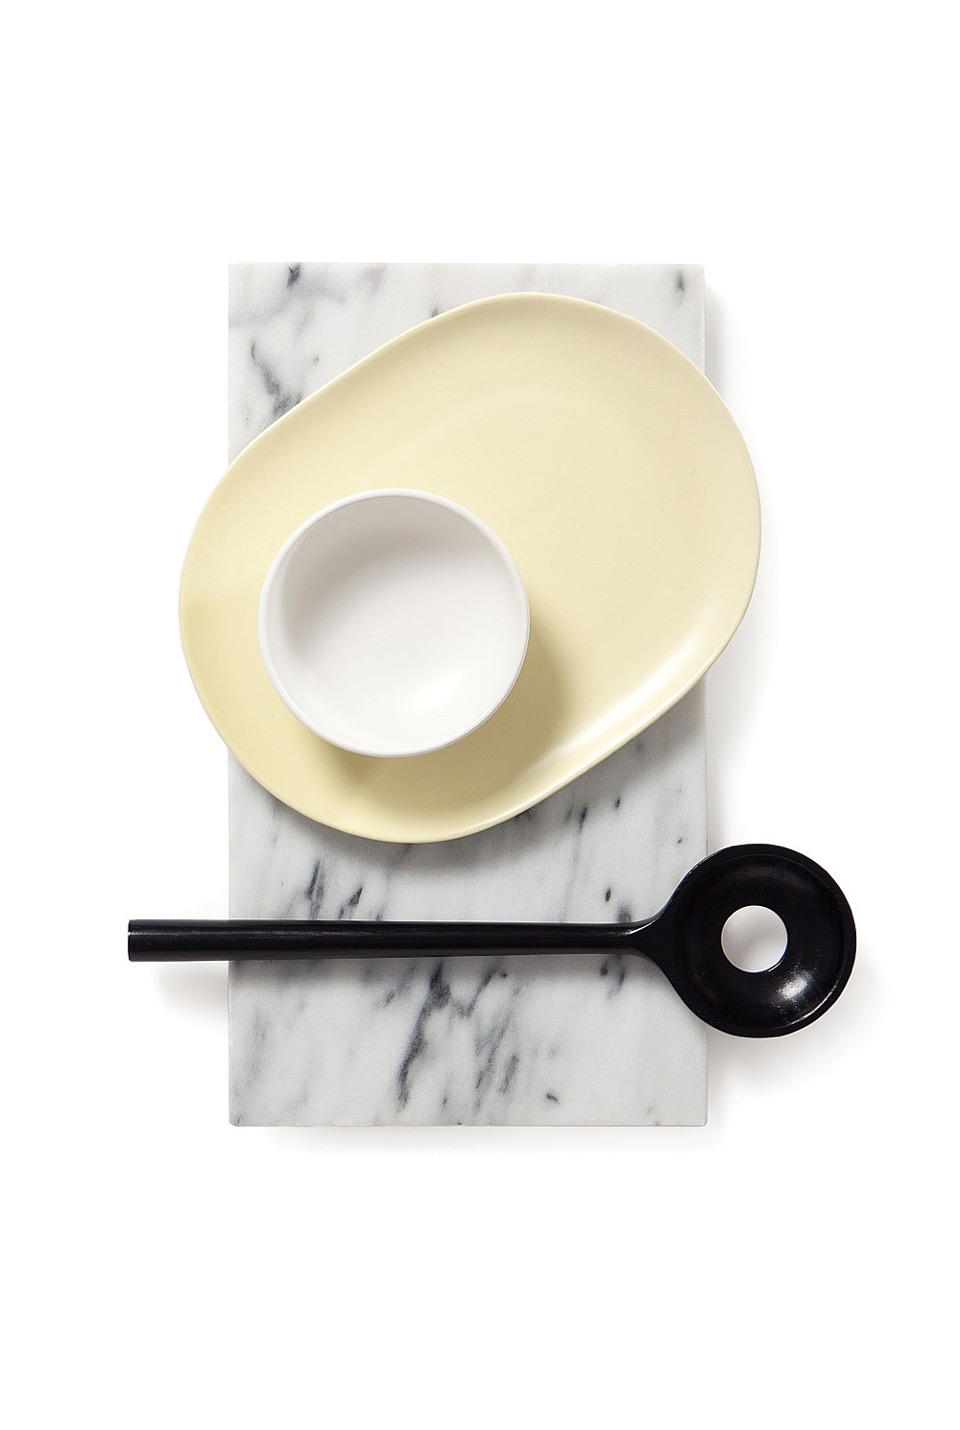 Barton Marble Rectangular Board by Country Road. Finding the Perfect Cheese Board.